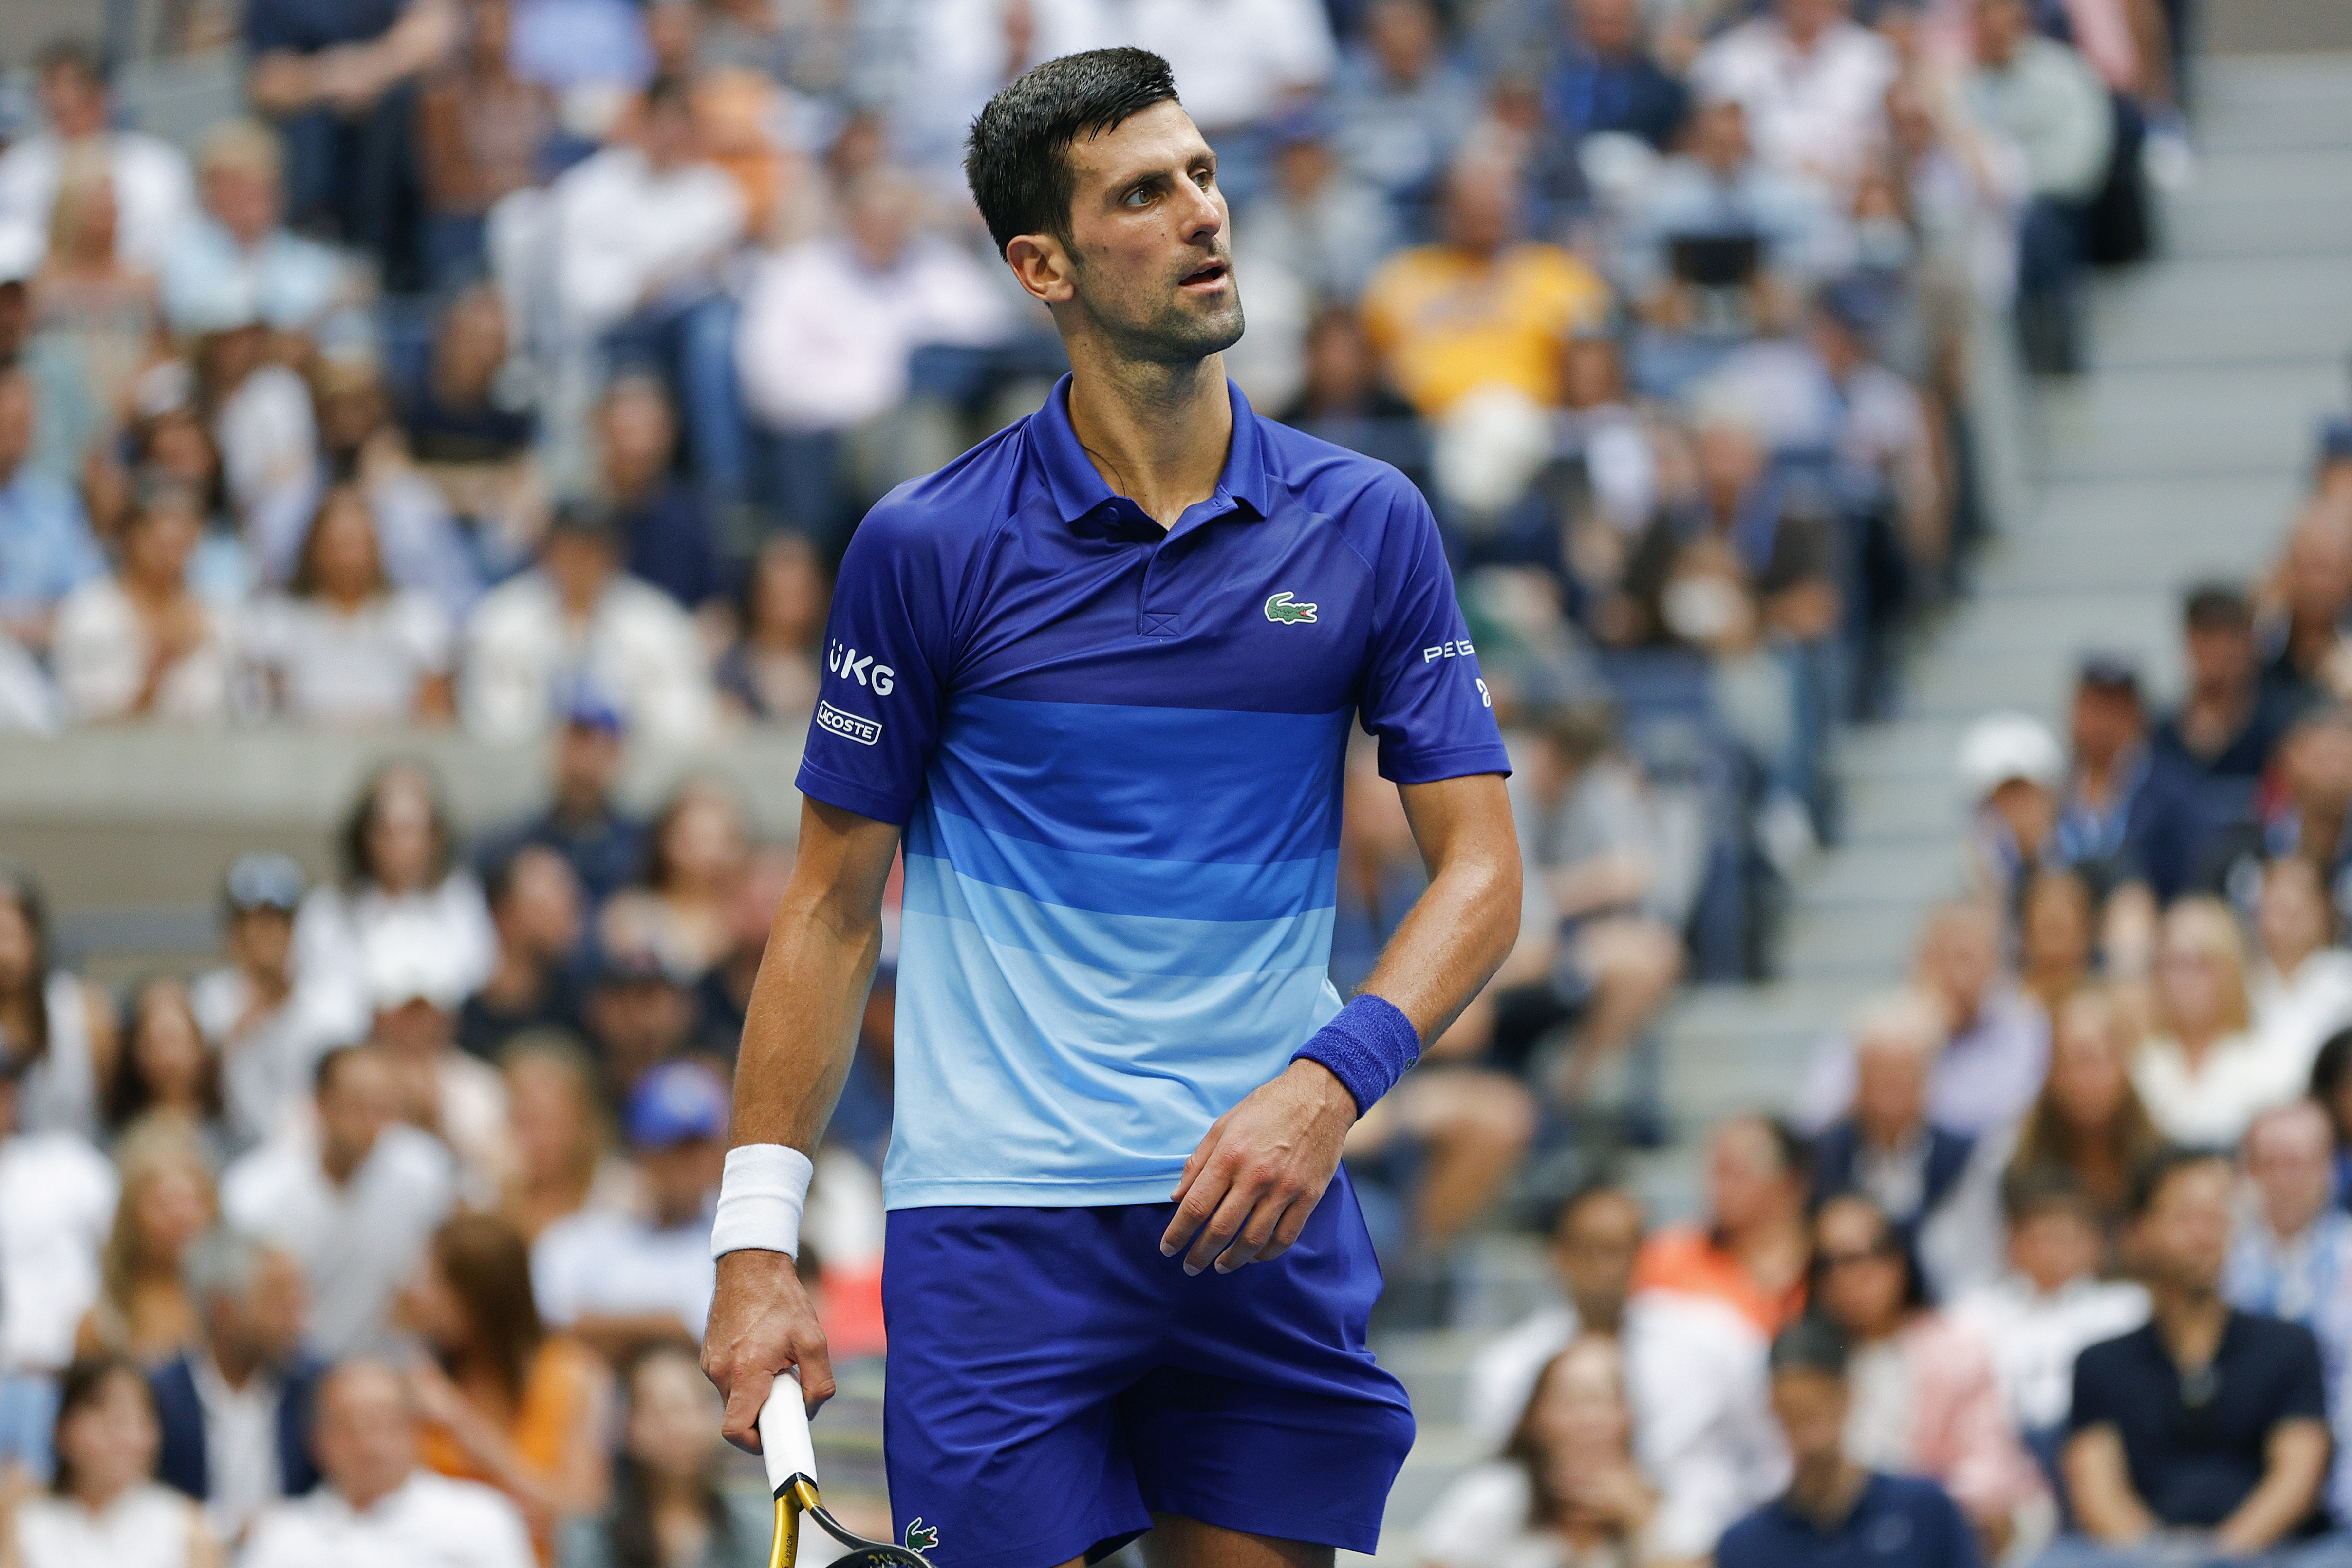 Novak Djokovic’s Australian Open appearance in doubt as official delivers vaccination warning